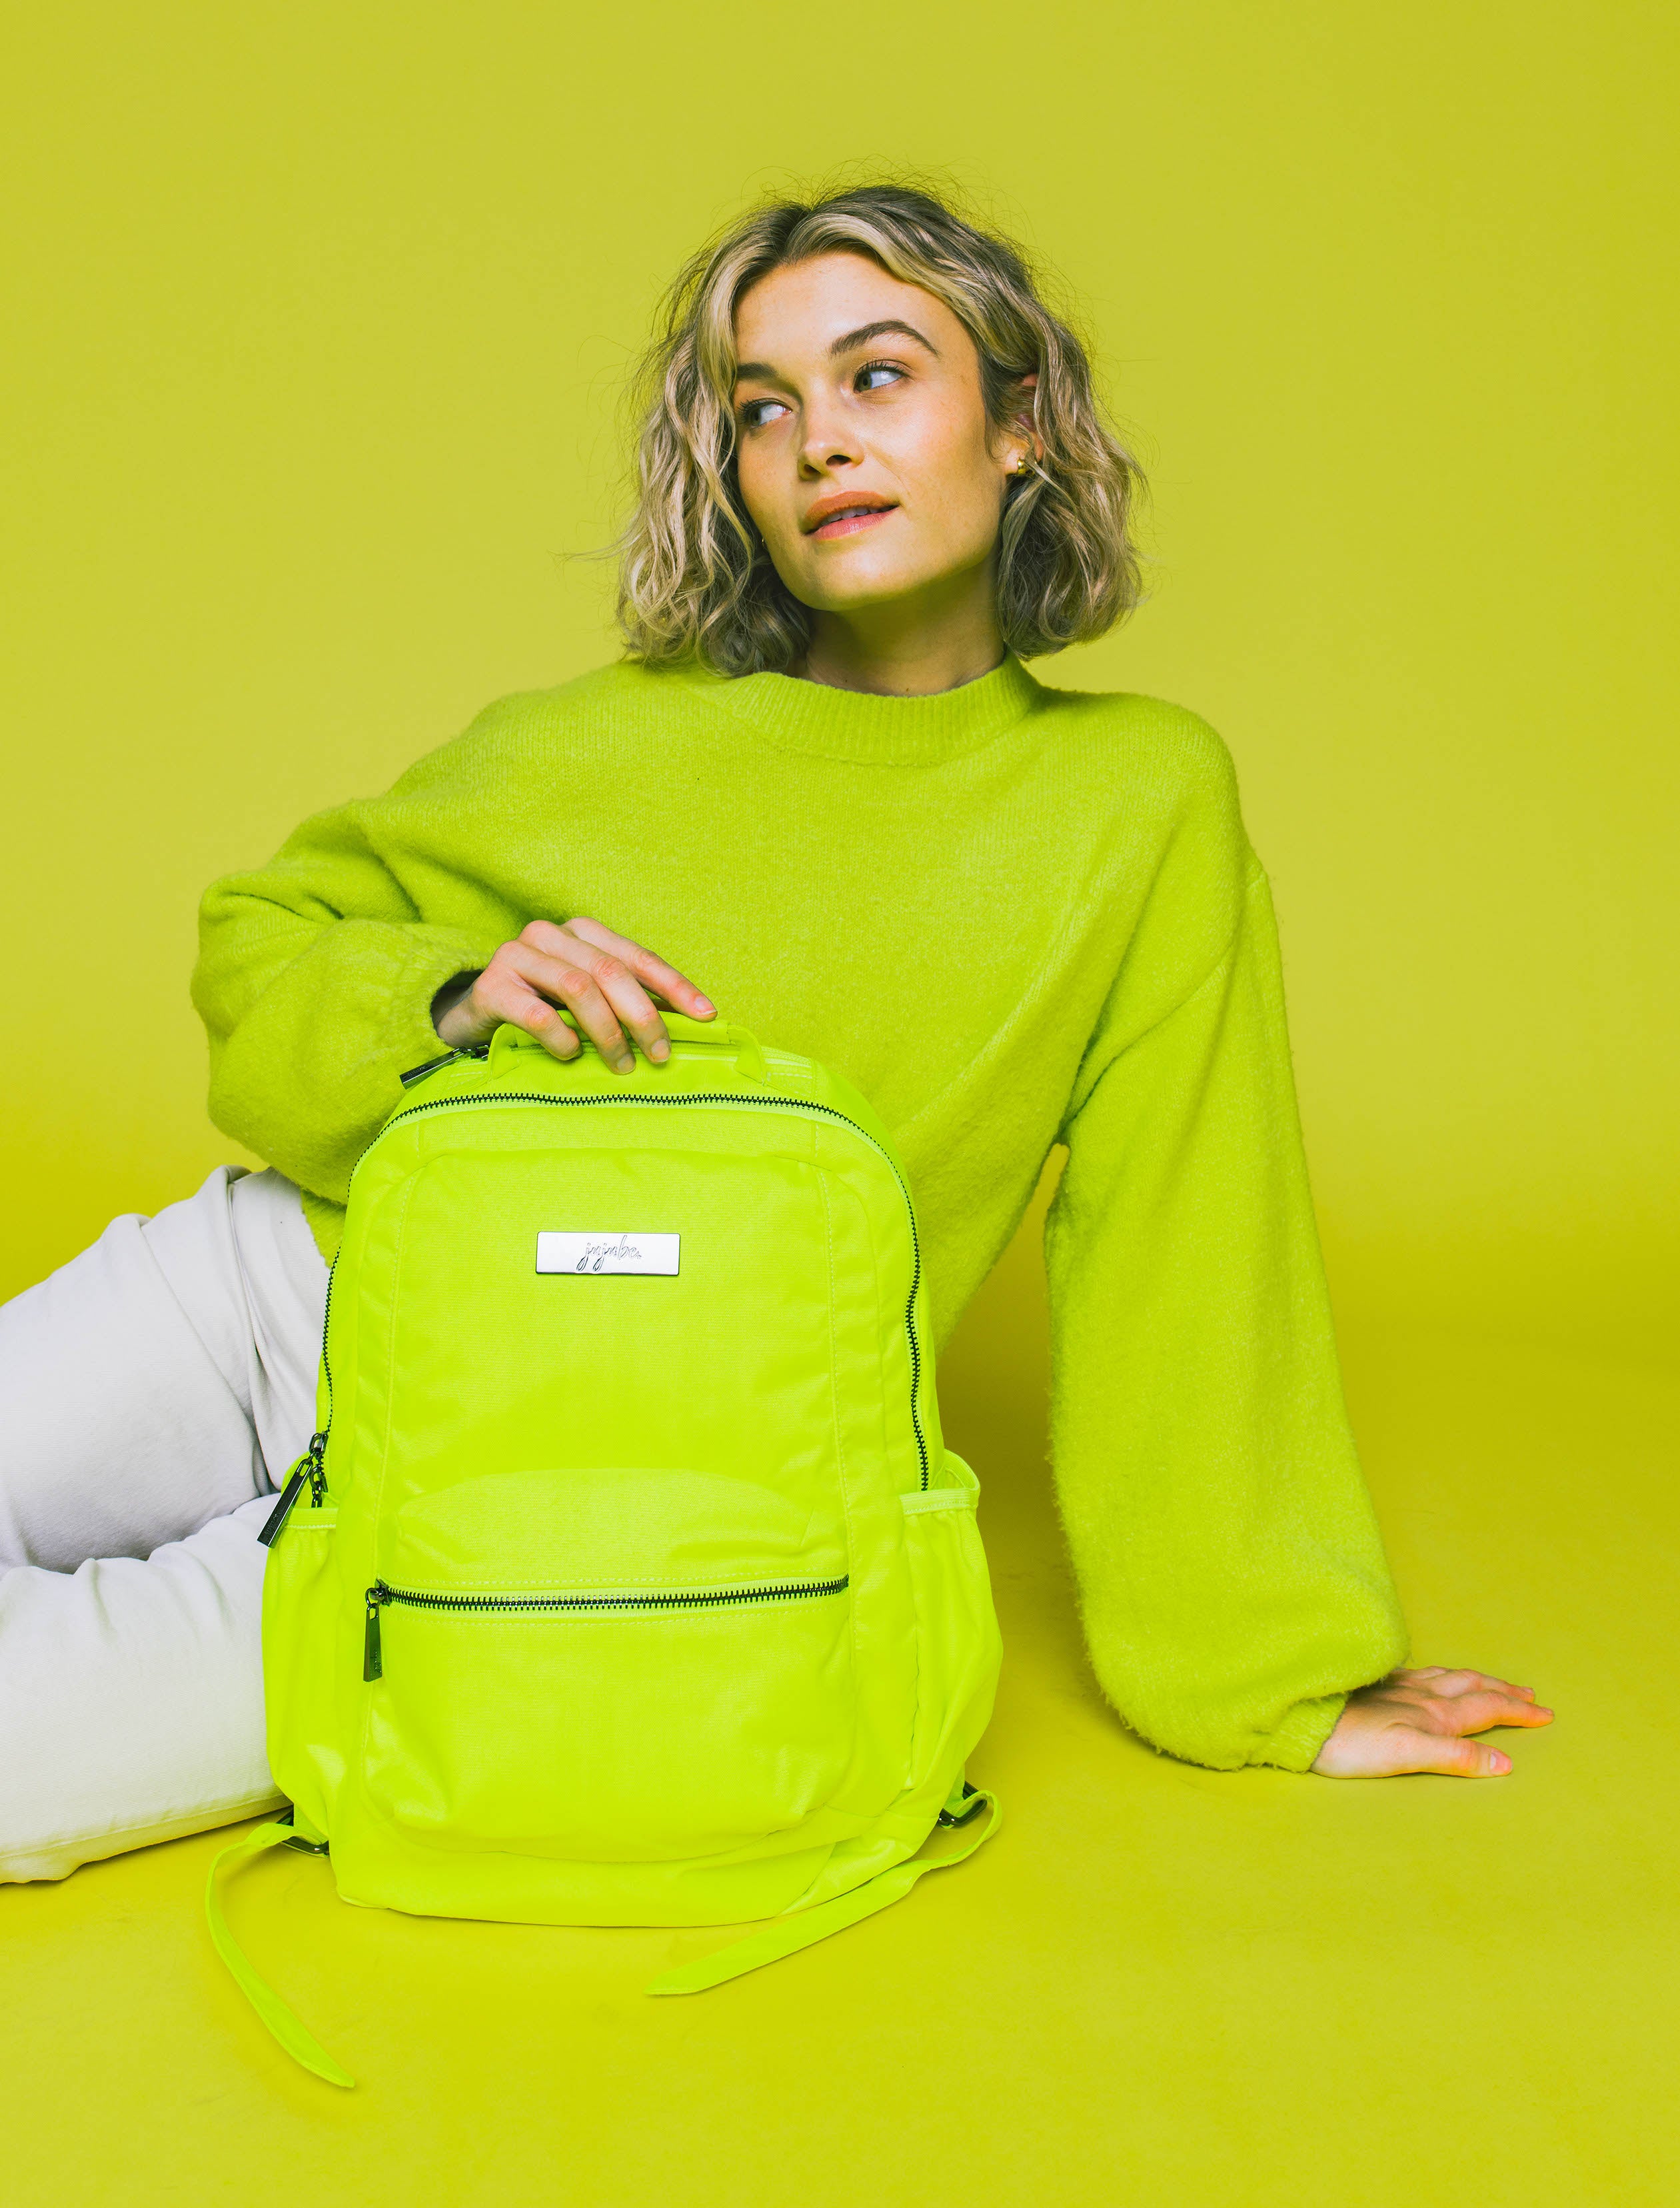 Neon Yellow Be Packed Backpack sitting in front of woman wearing matching colored sweater